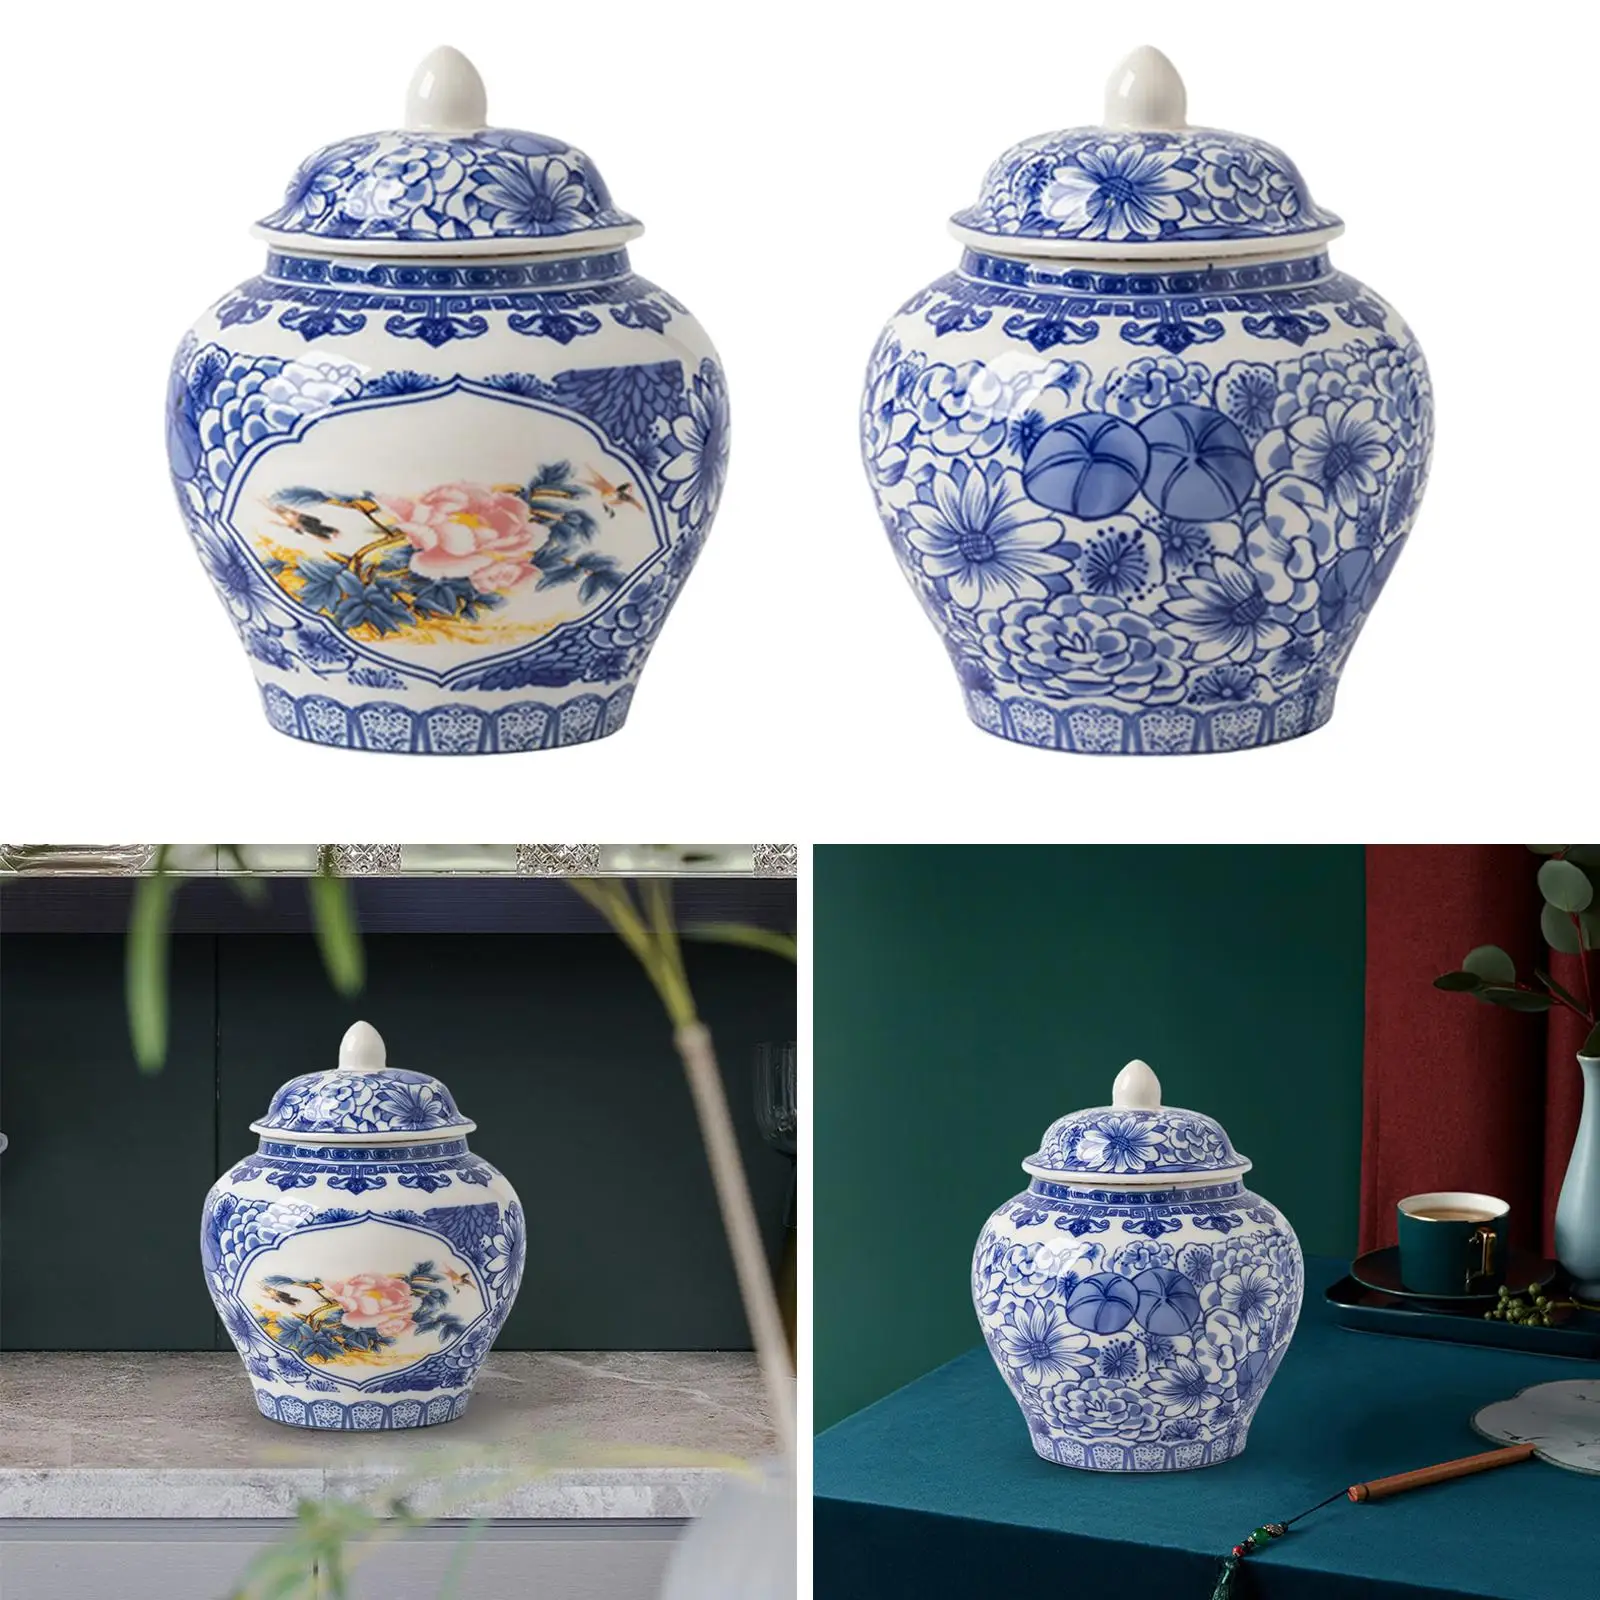 Ceramic Ginger Jars with Lids Decorative Ceramic Vase with Lid for Fireplace